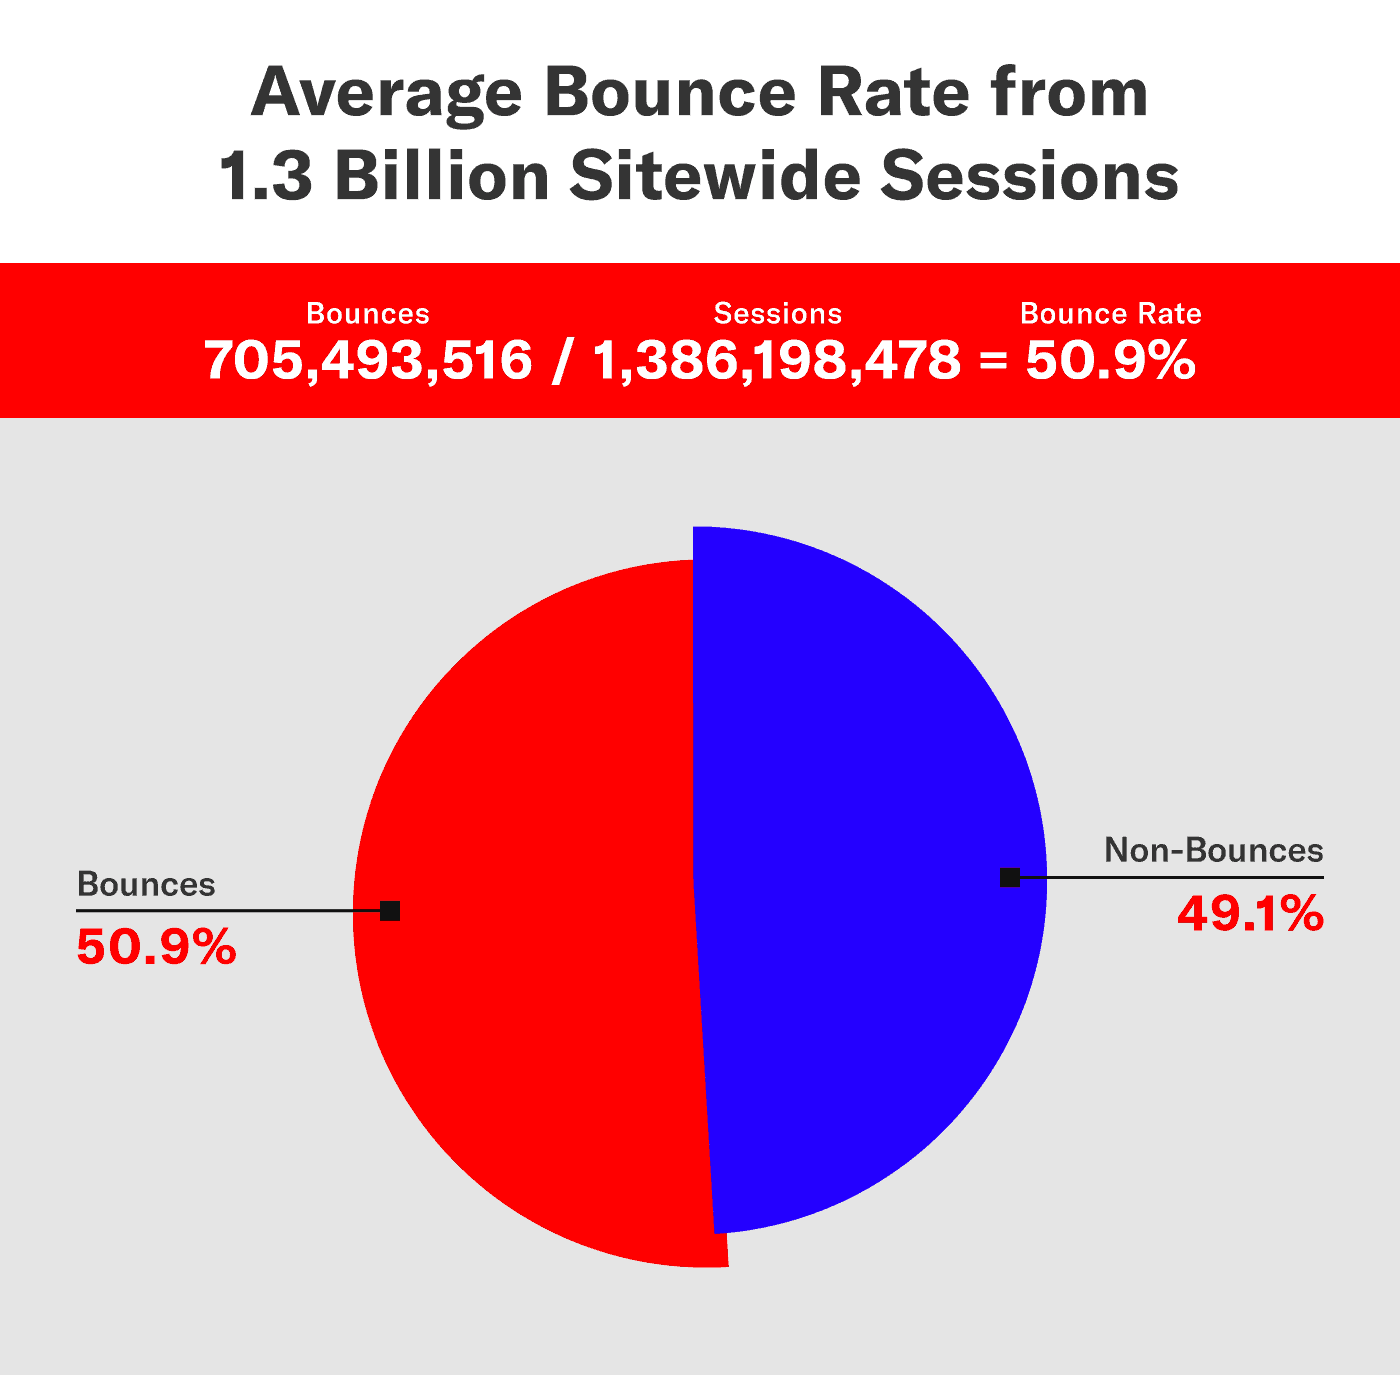 results from a bounce rate study of more than 1.3 billion sessions